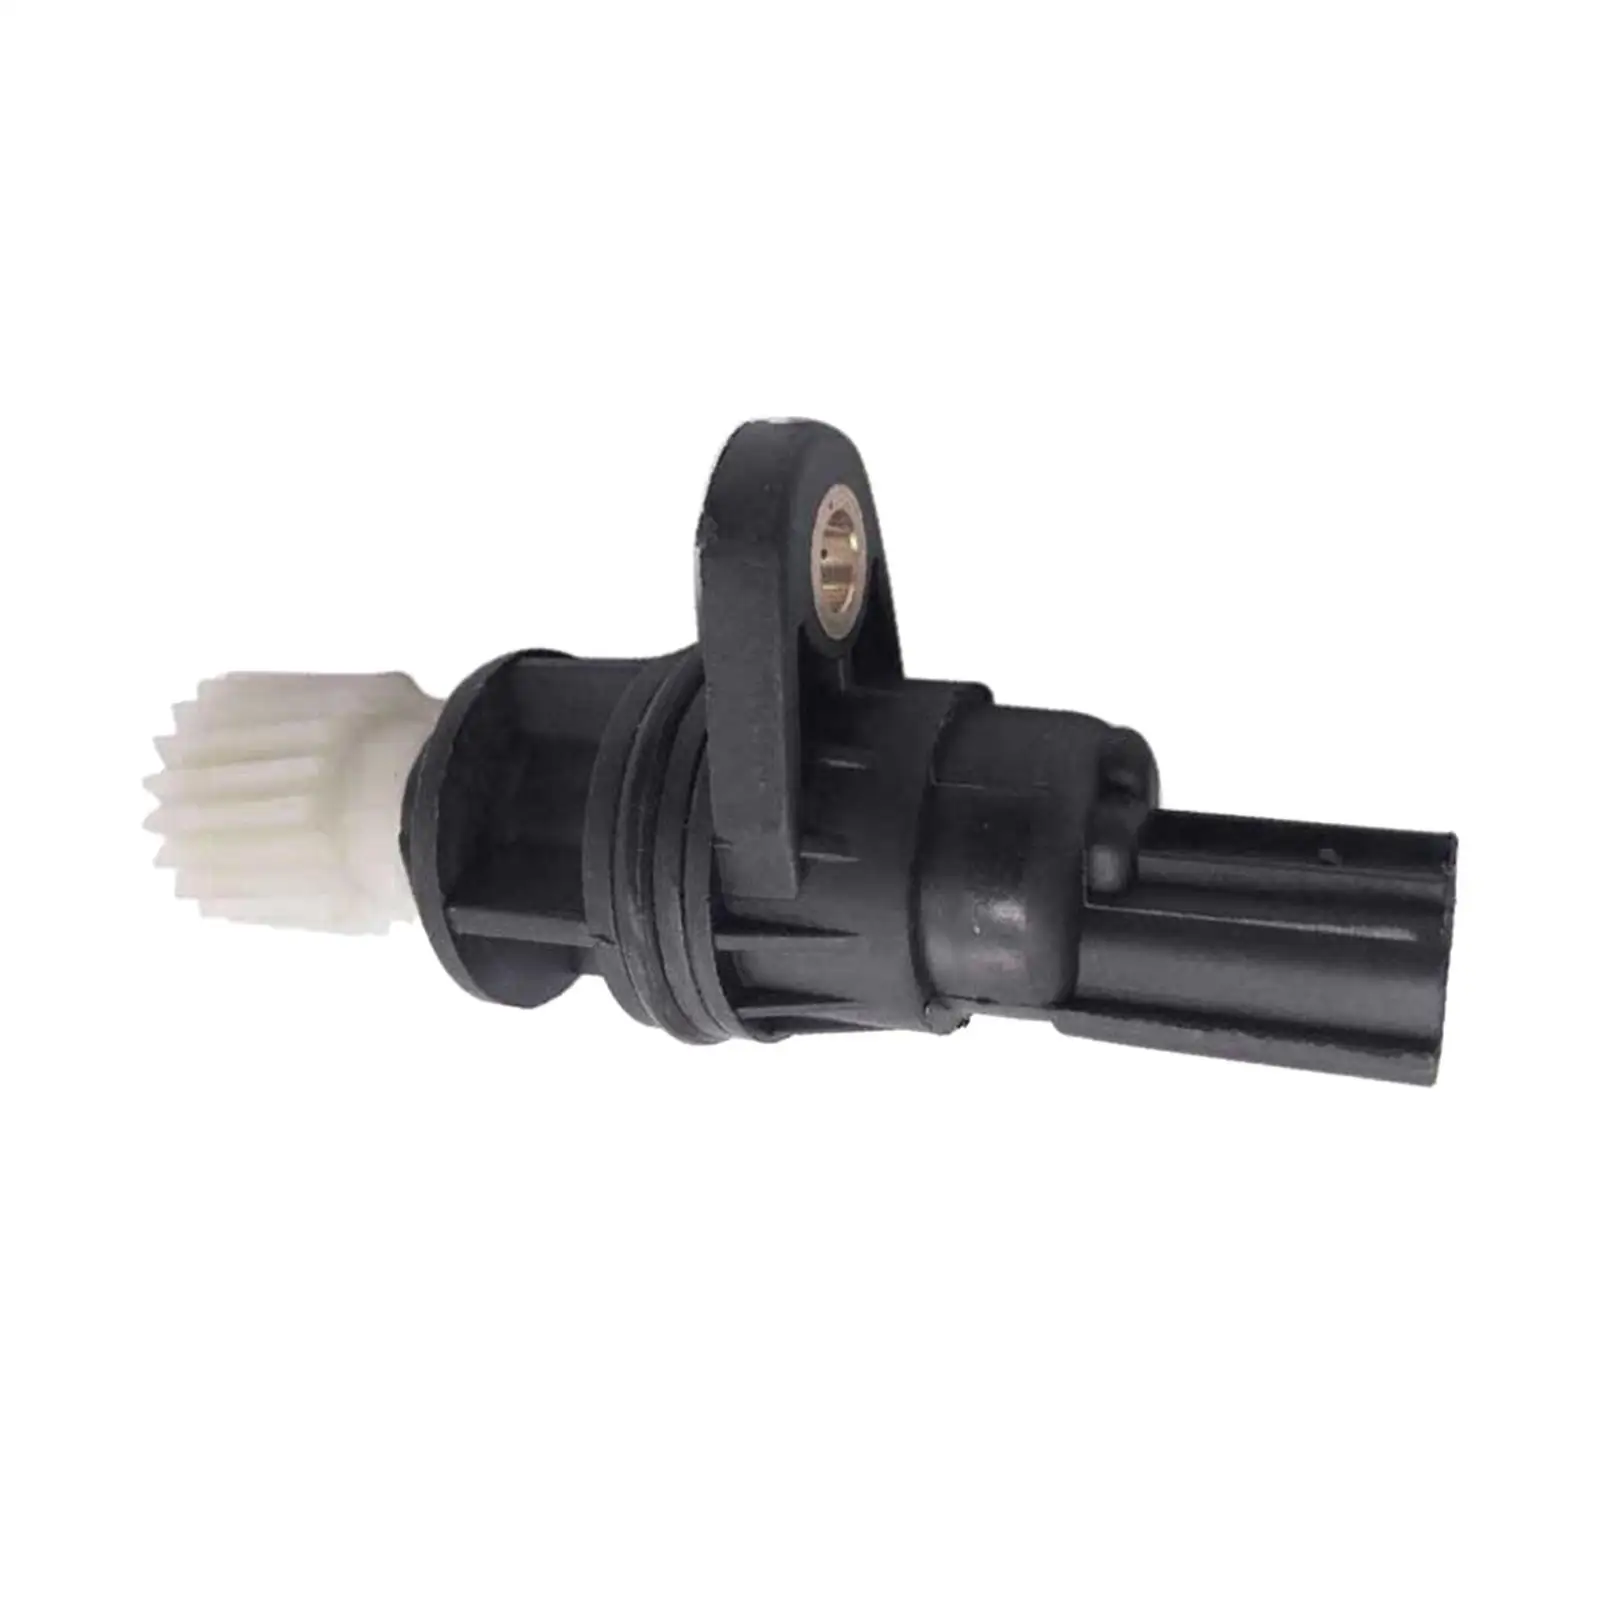 R510-17400 Speed Sensor R51017400 M5AC17400 for Replaces Automotive Accessories Professional